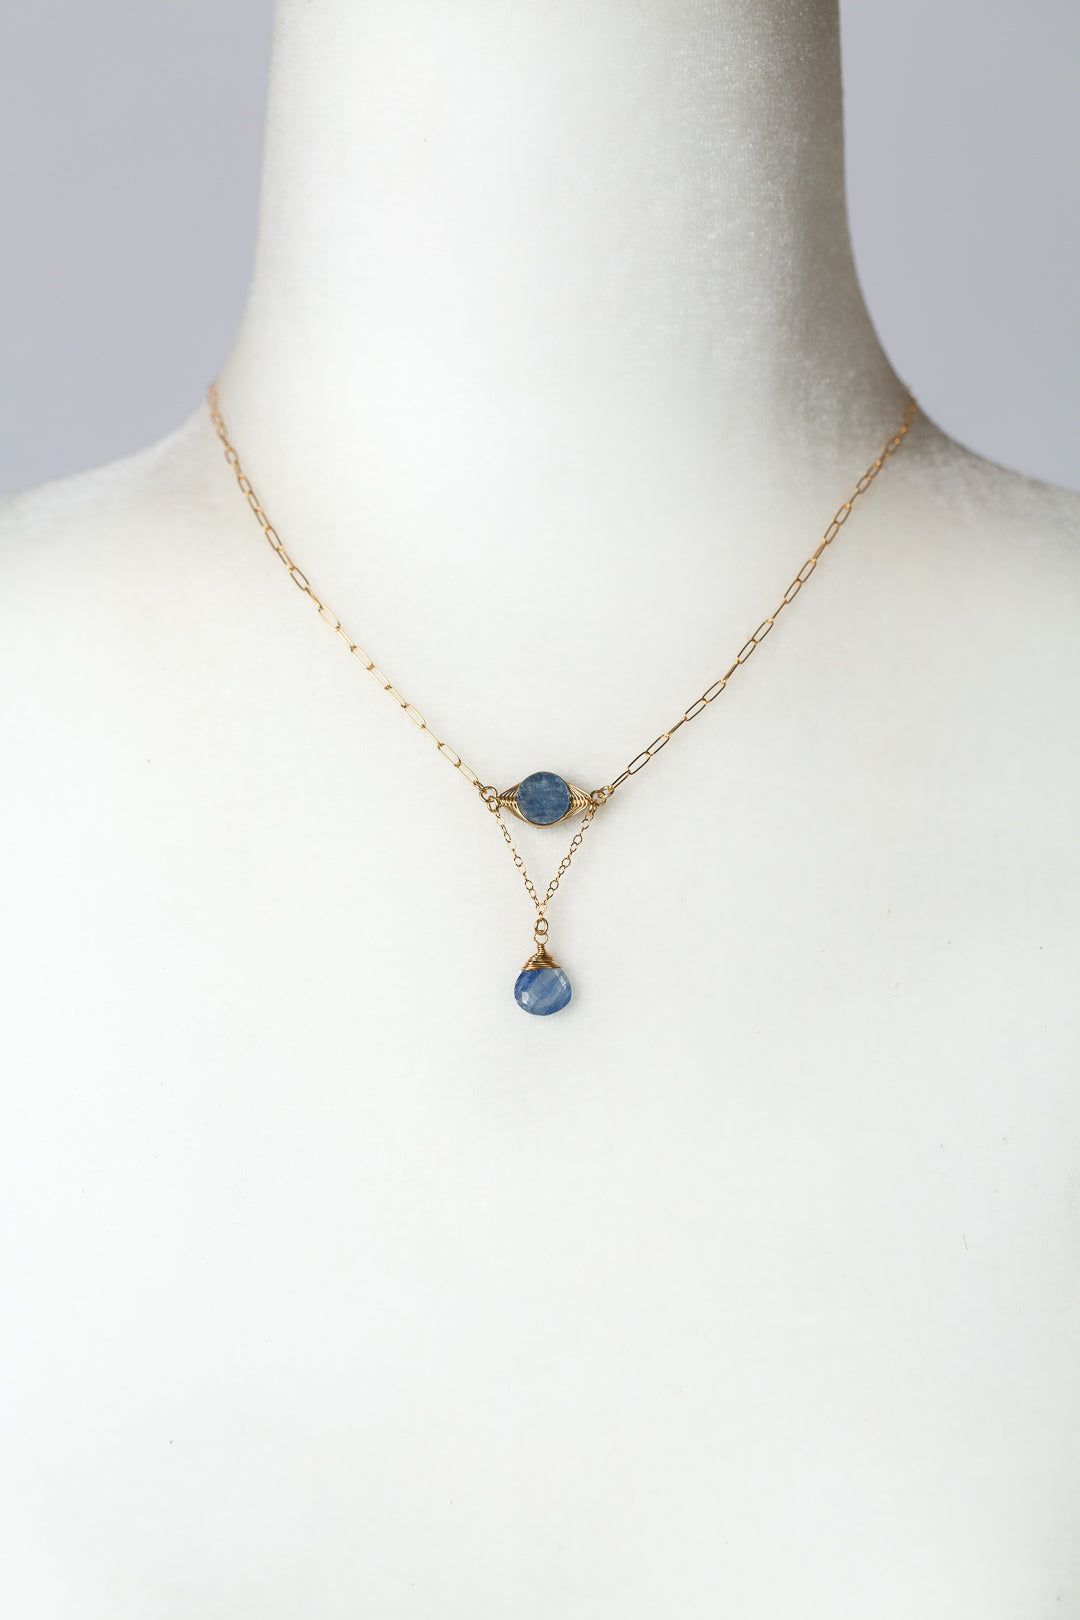 Ripple 15-17" with Kyanite, Gold Simple Necklace